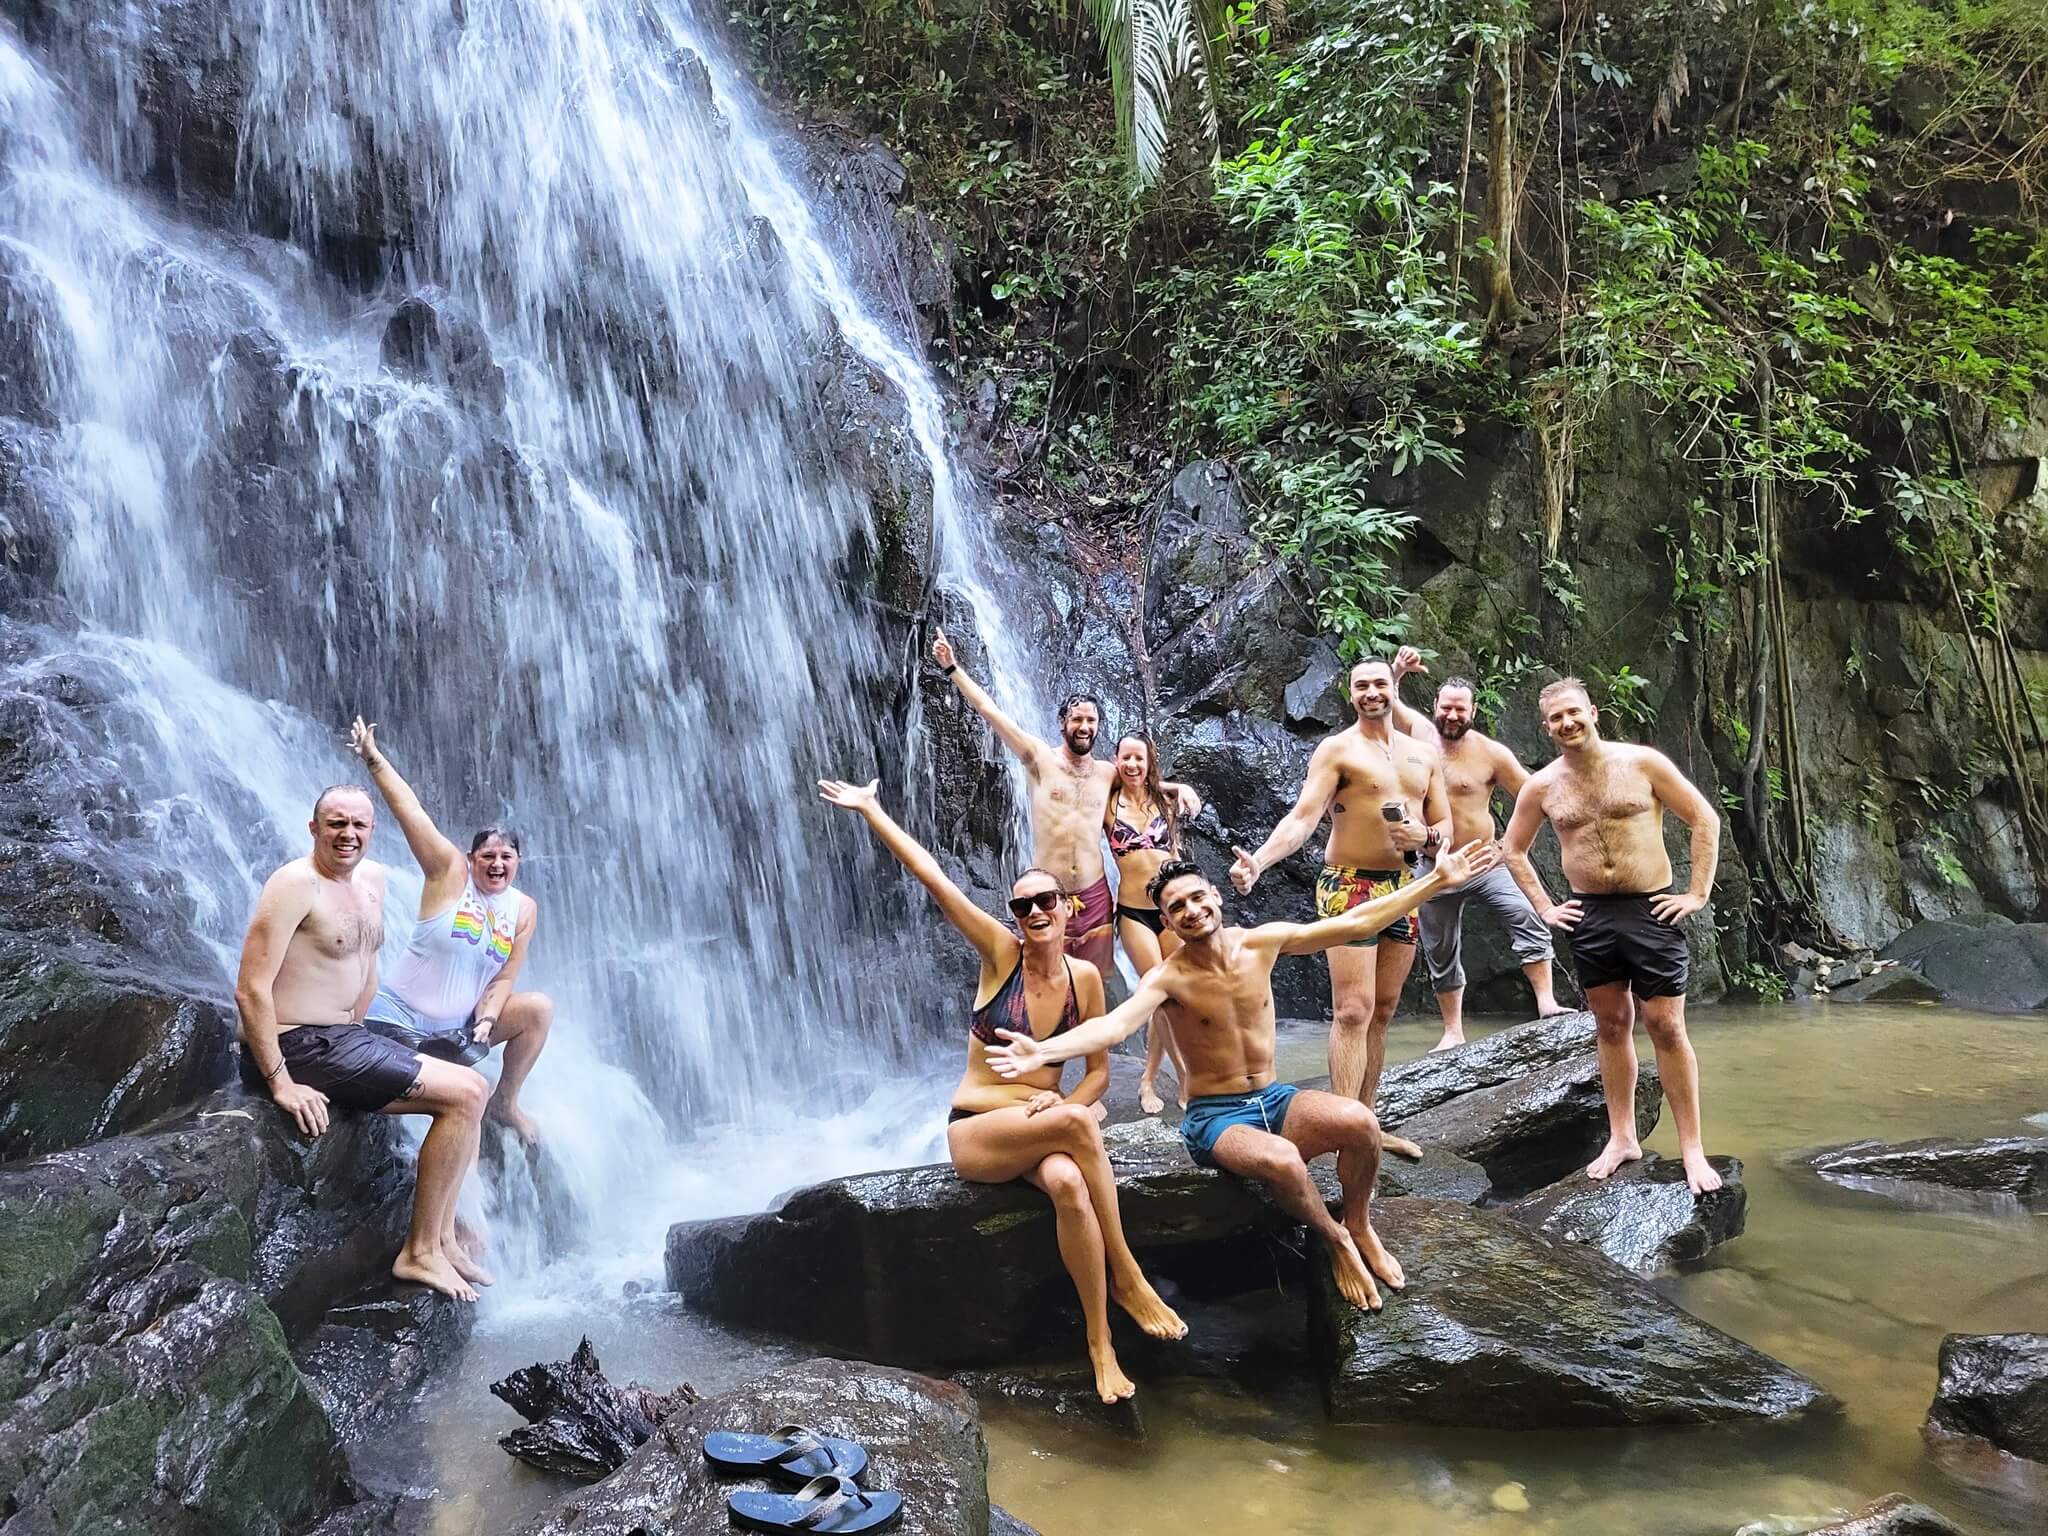 People at waterfall